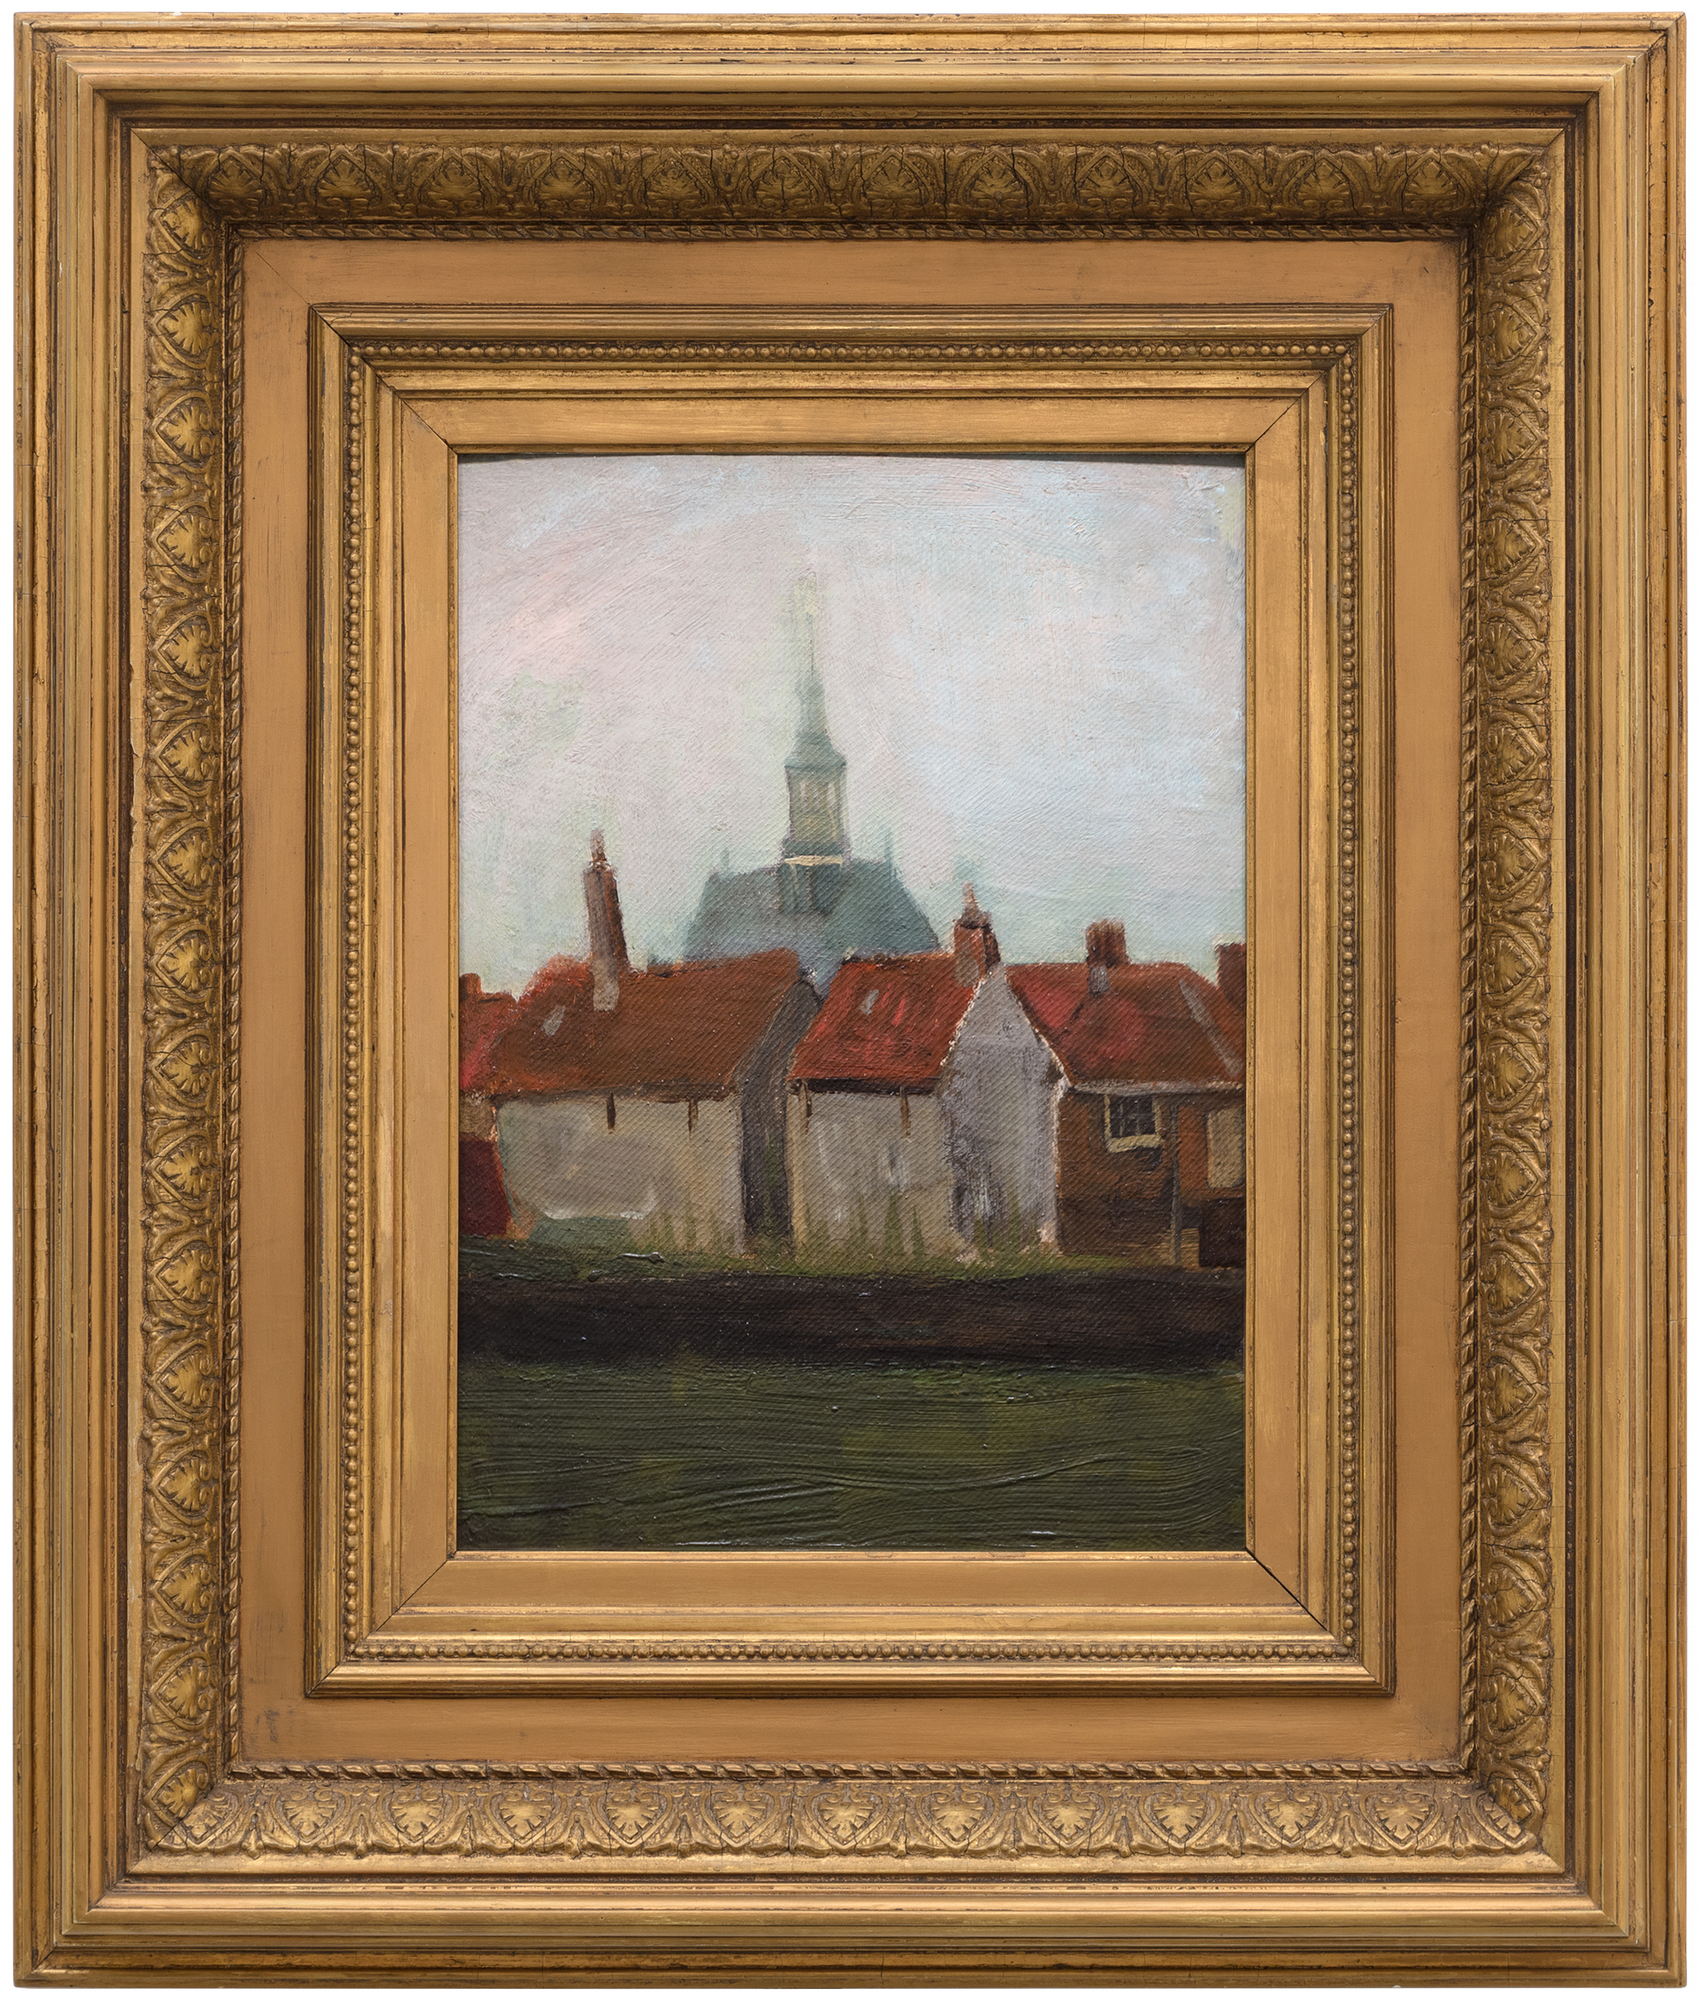 VINCENT VAN GOGH - The New Church and Old Houses in the Hague - oil on canvas on panel - 13 5/8 x 9 3/4 in.